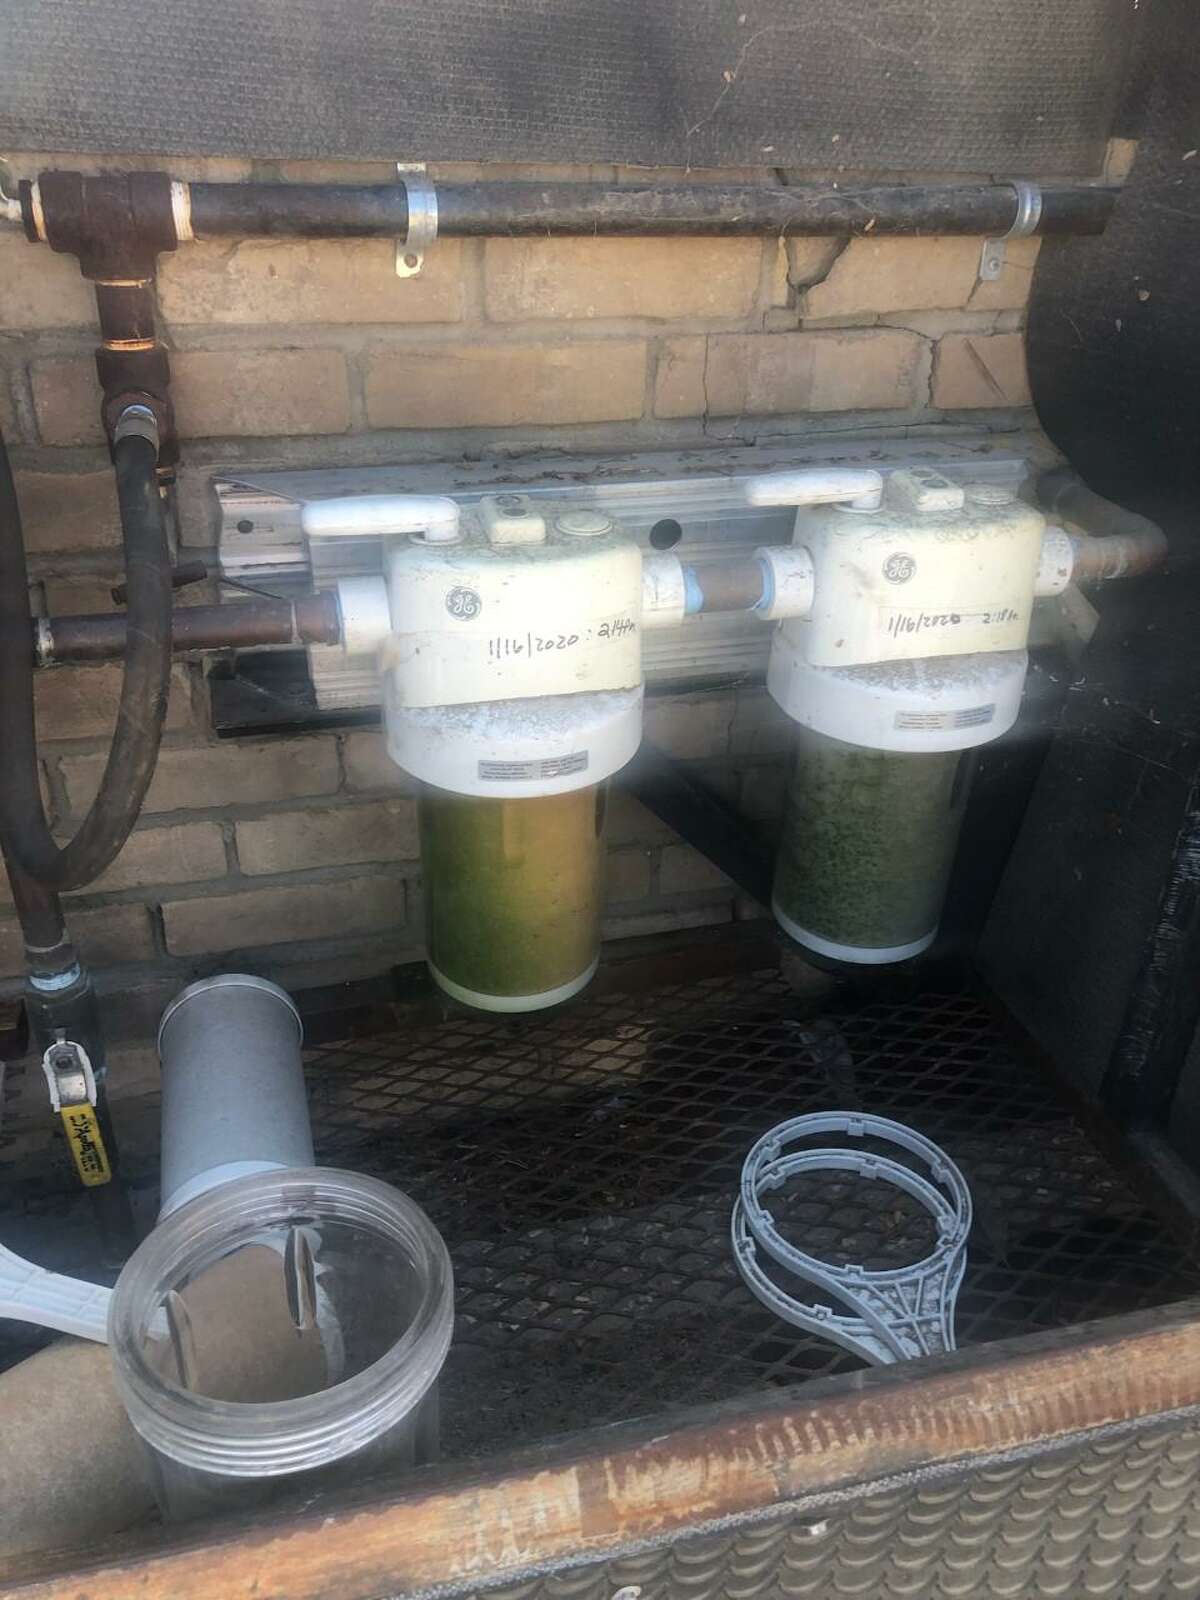 On the right is a new water filter, and on the left is how Federico Martin Reyes discovered the same filters just two weeks later before he alerted authorities.